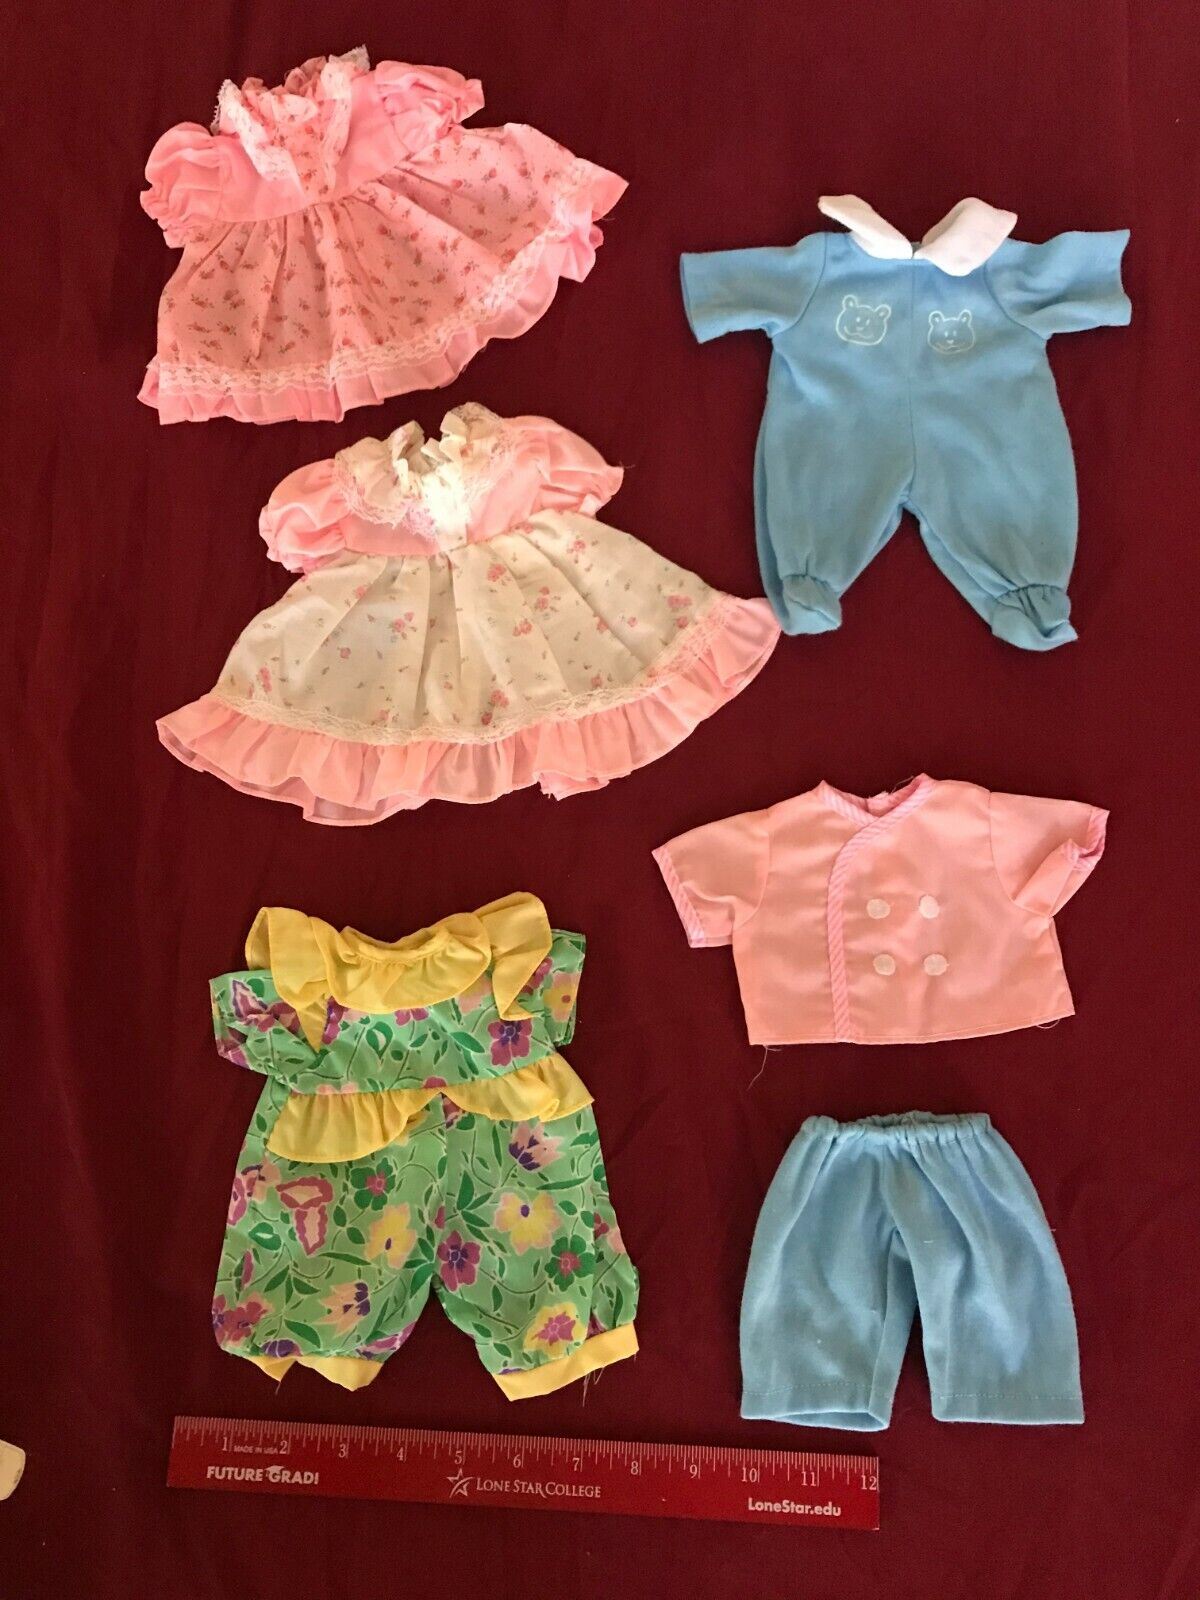 Lots to Love Babies clothing lot of 6: 2 dresses, 2 jumpsuits, 1 pant, & 1 shirt Handmade